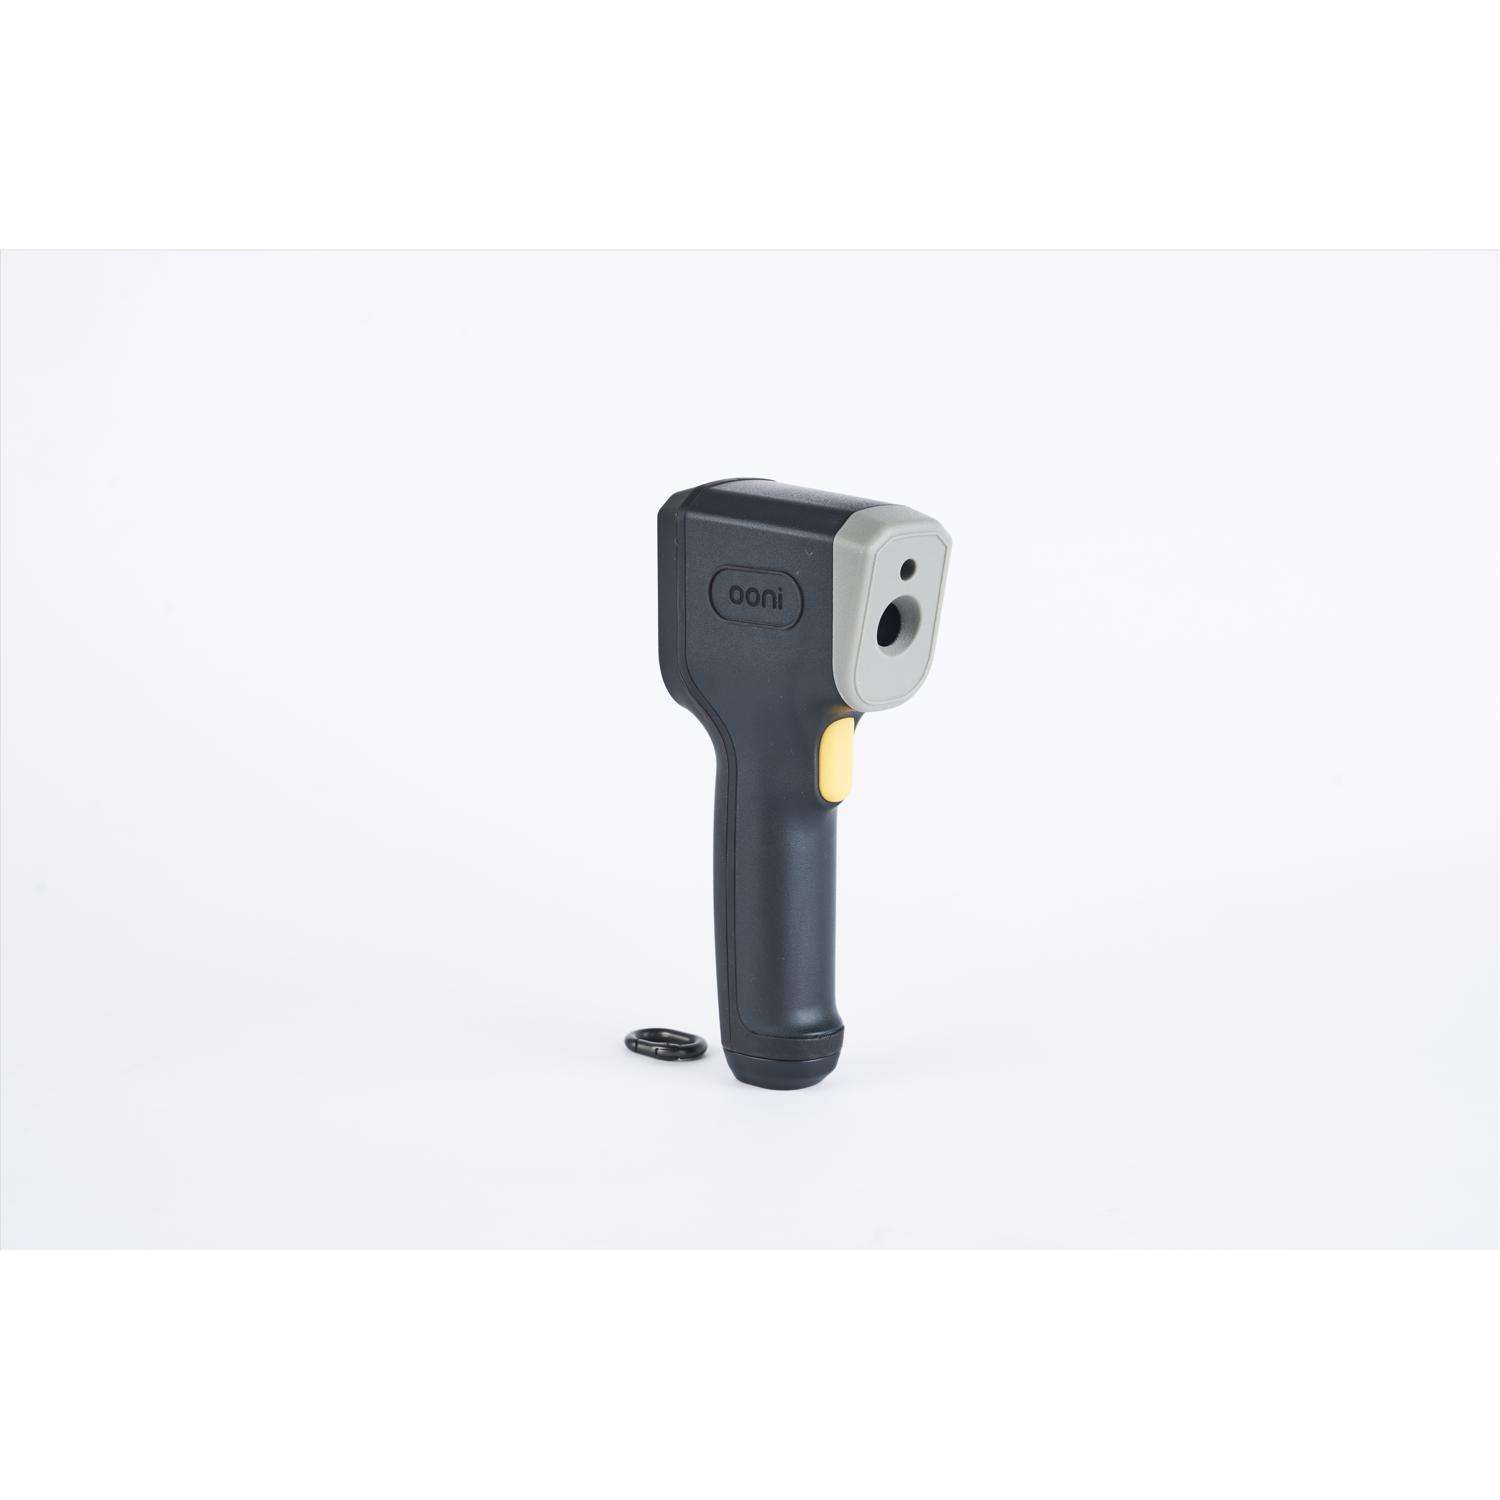 OONI Digital Infrared Thermometer - New Product Review 